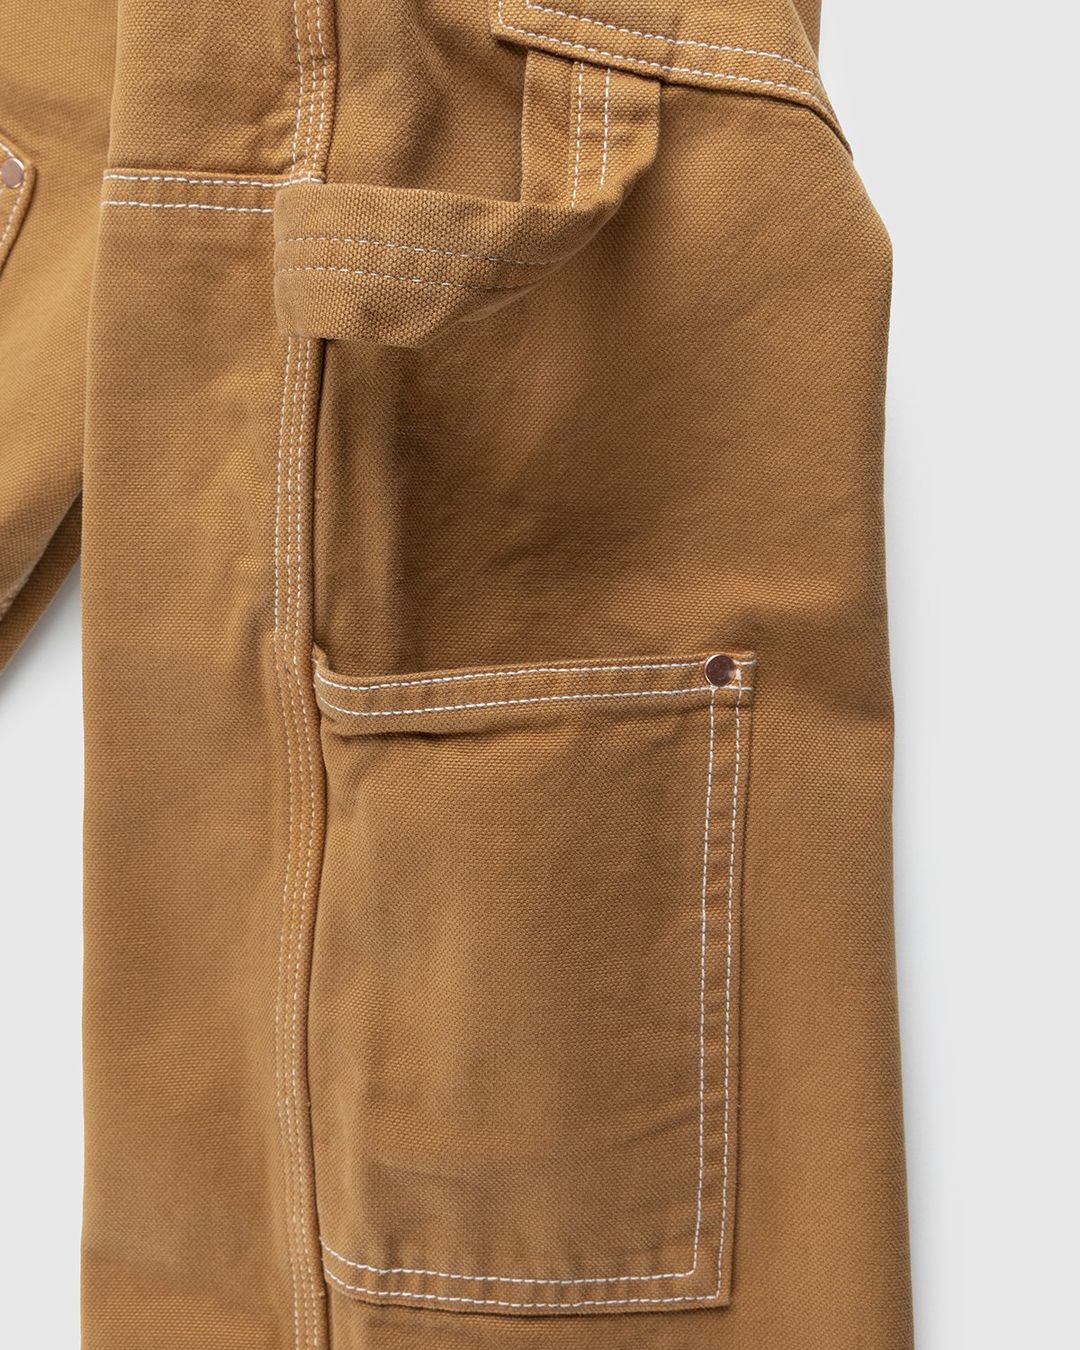 Stan Ray – Double Knee Pant Brown Duck | Highsnobiety Shop